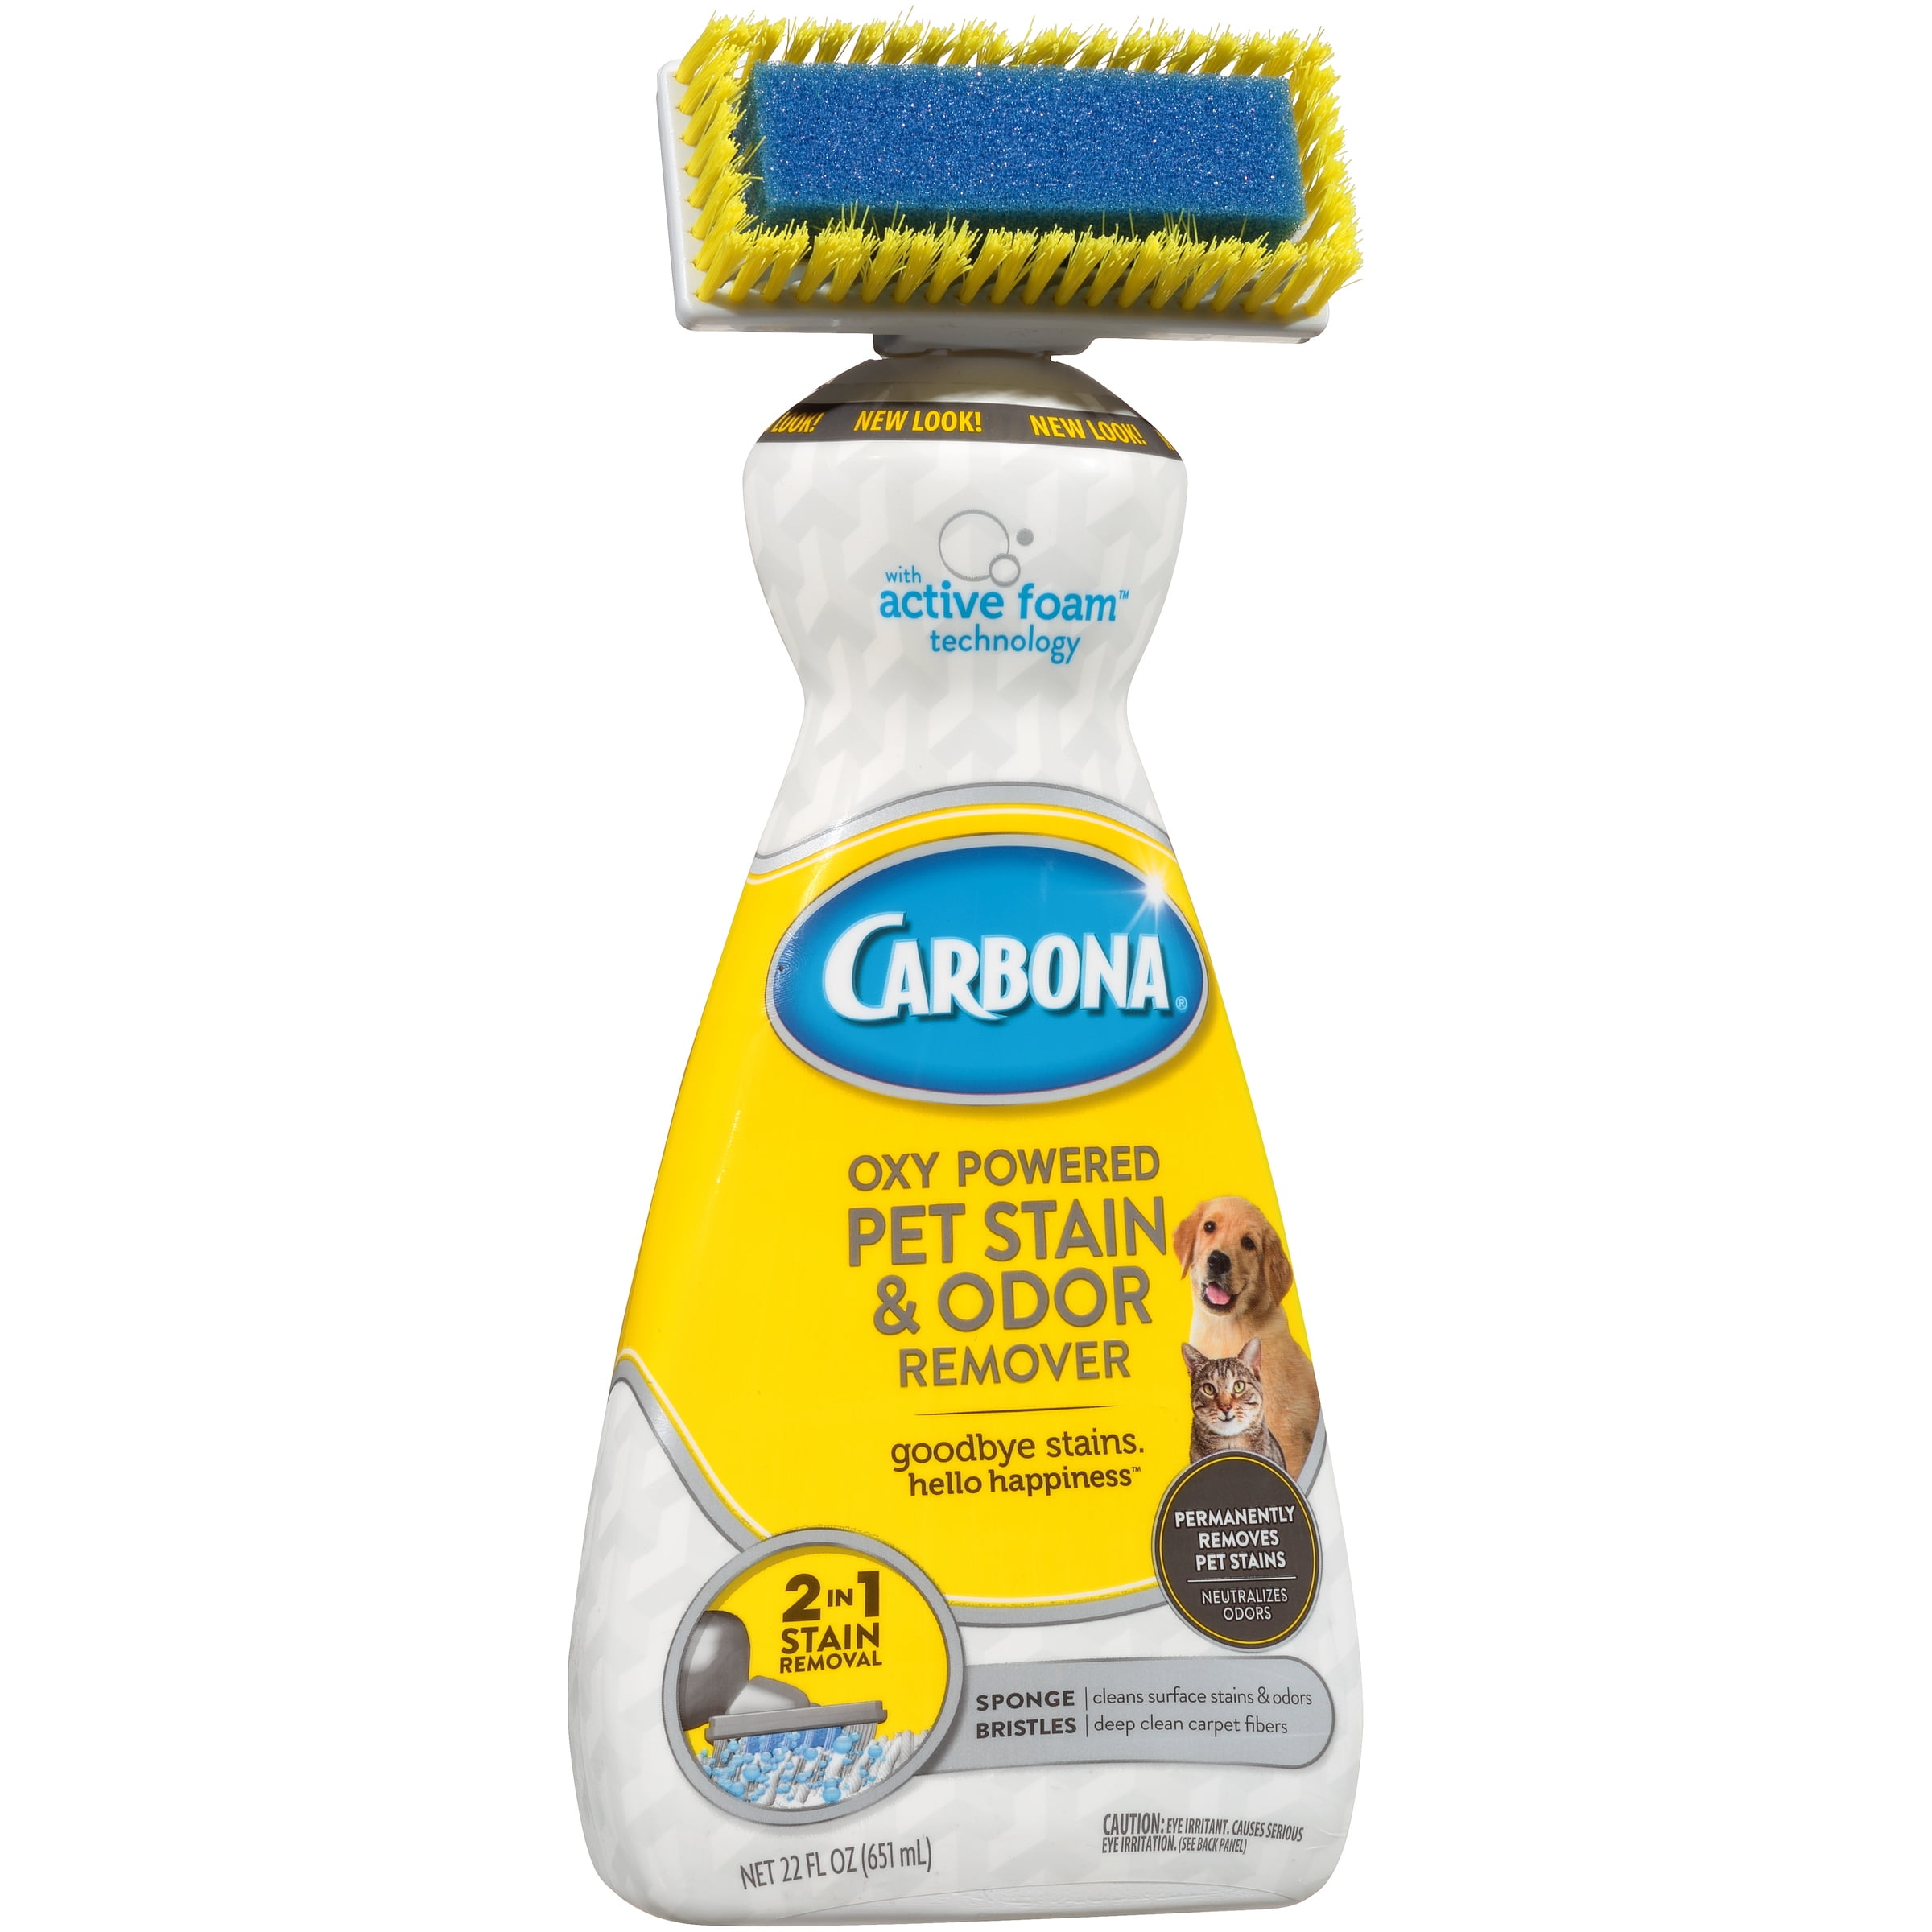 Carbona Carpet Cleaner with Brush, Oxy-Powered Foam for Spot Stain Removal